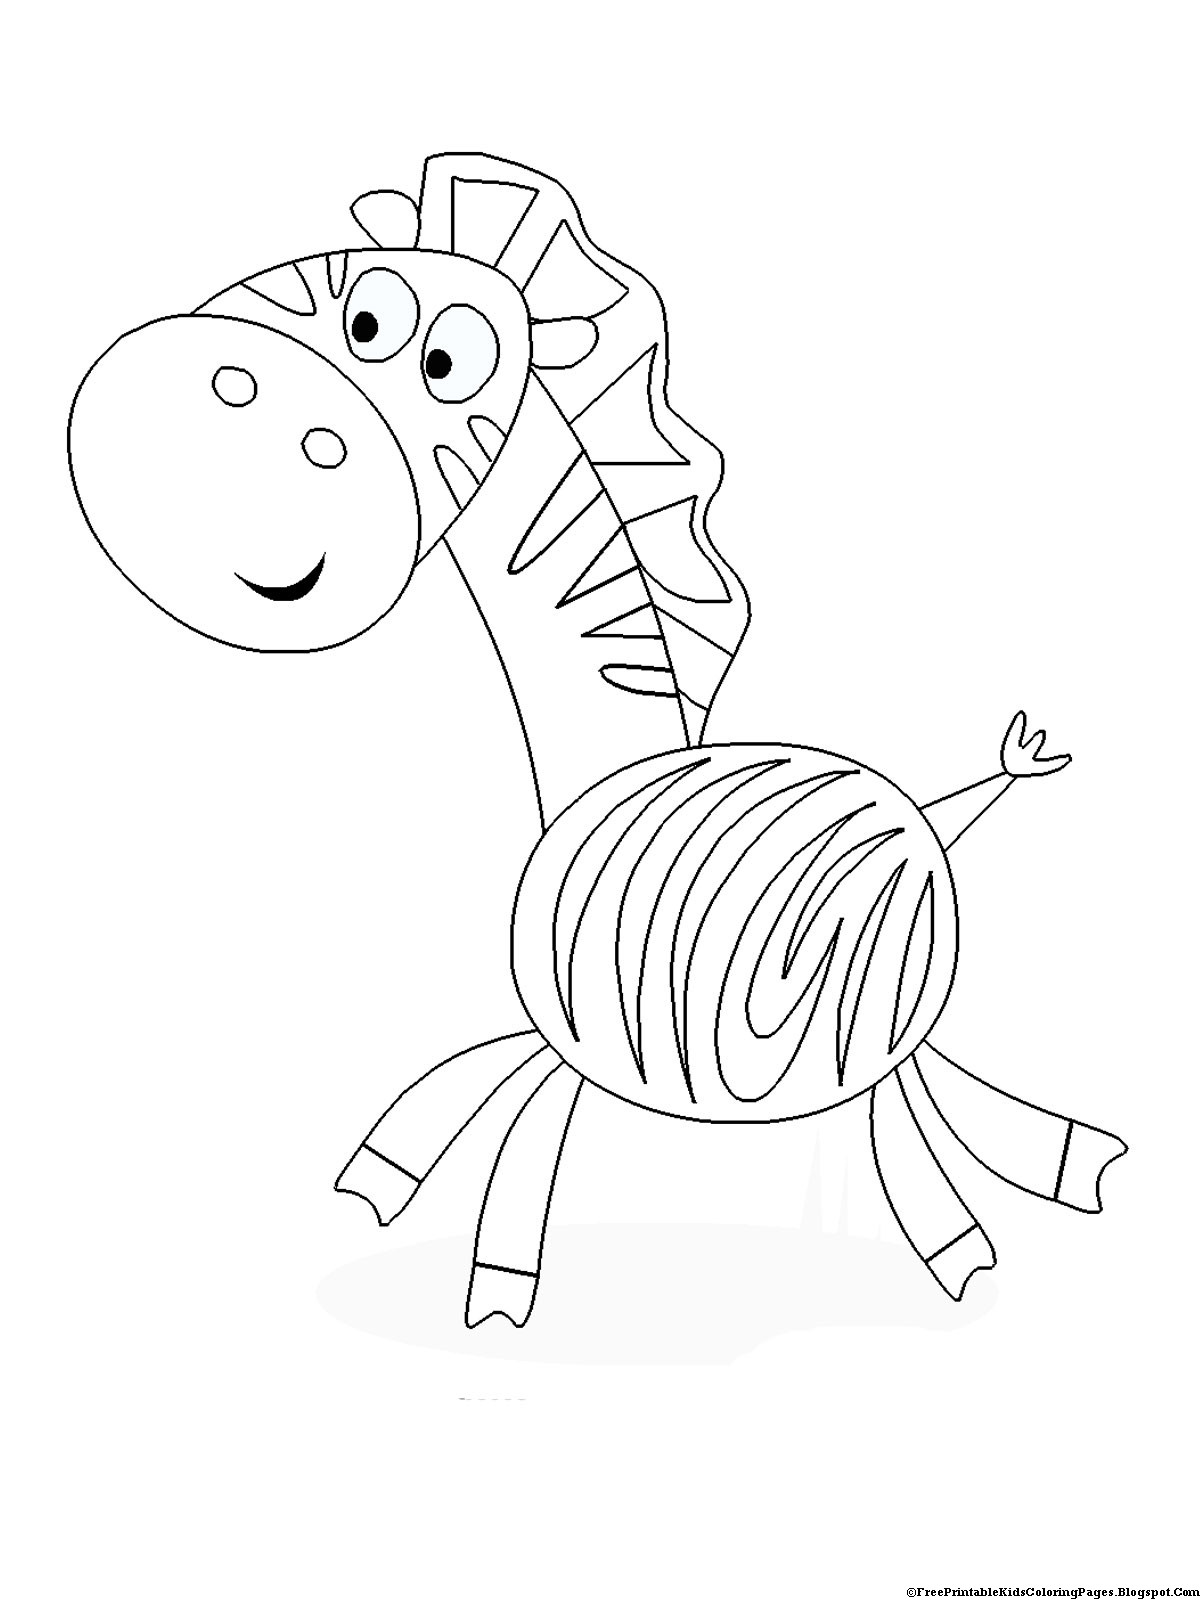 Coloring Books For Toddlers
 Zebra Coloring Pages